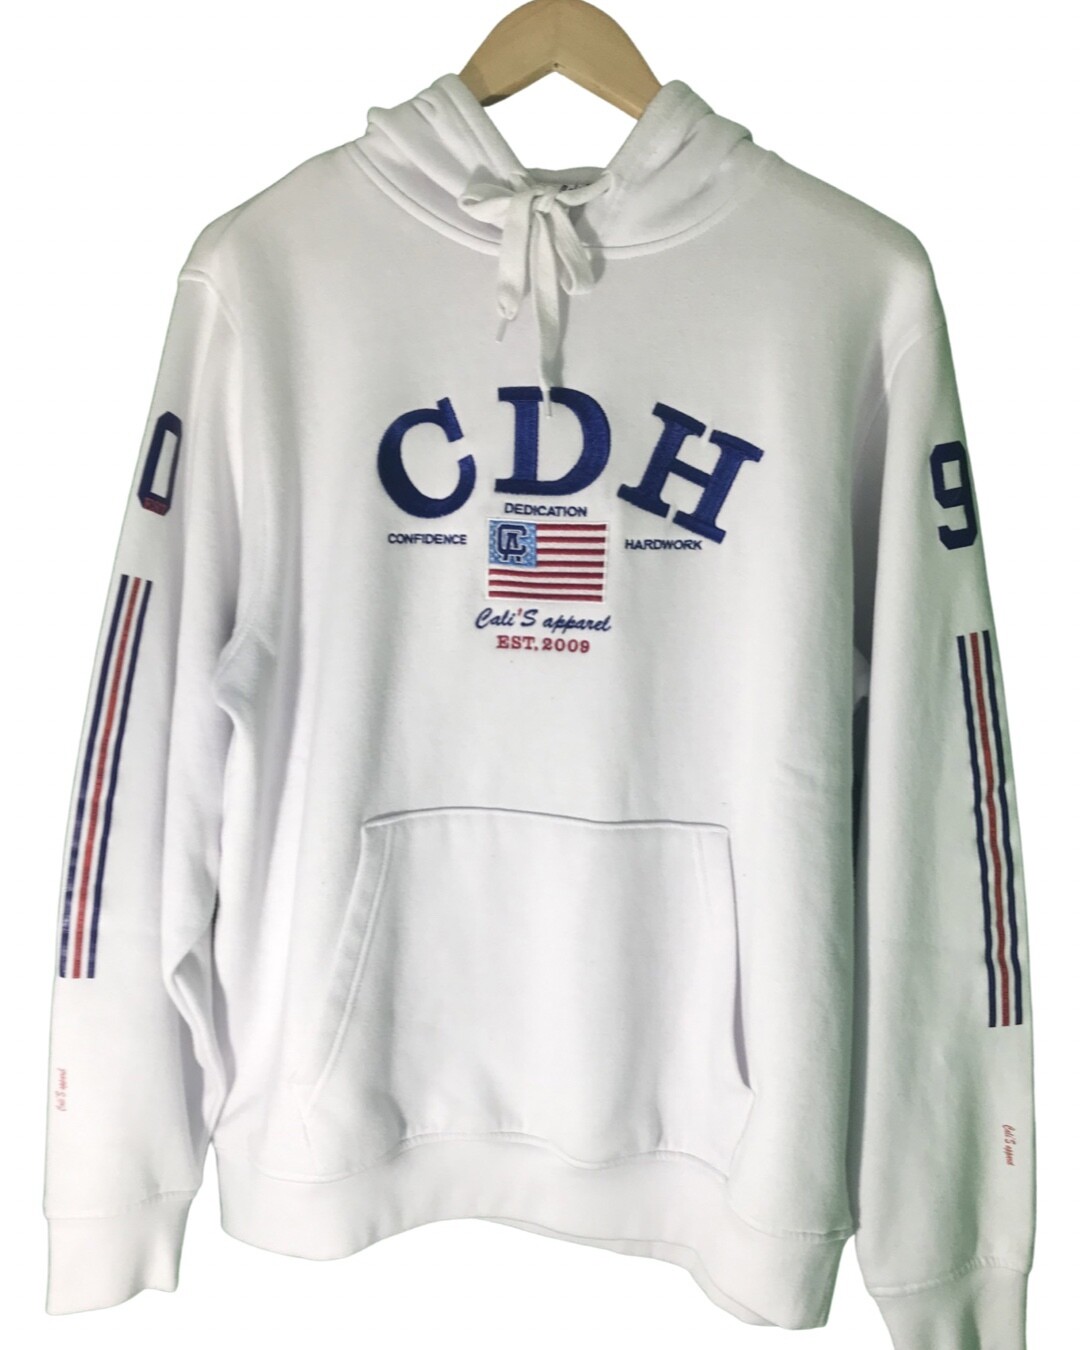 Cali's apparel NYC CDH WHITE Pull Over Hoodie